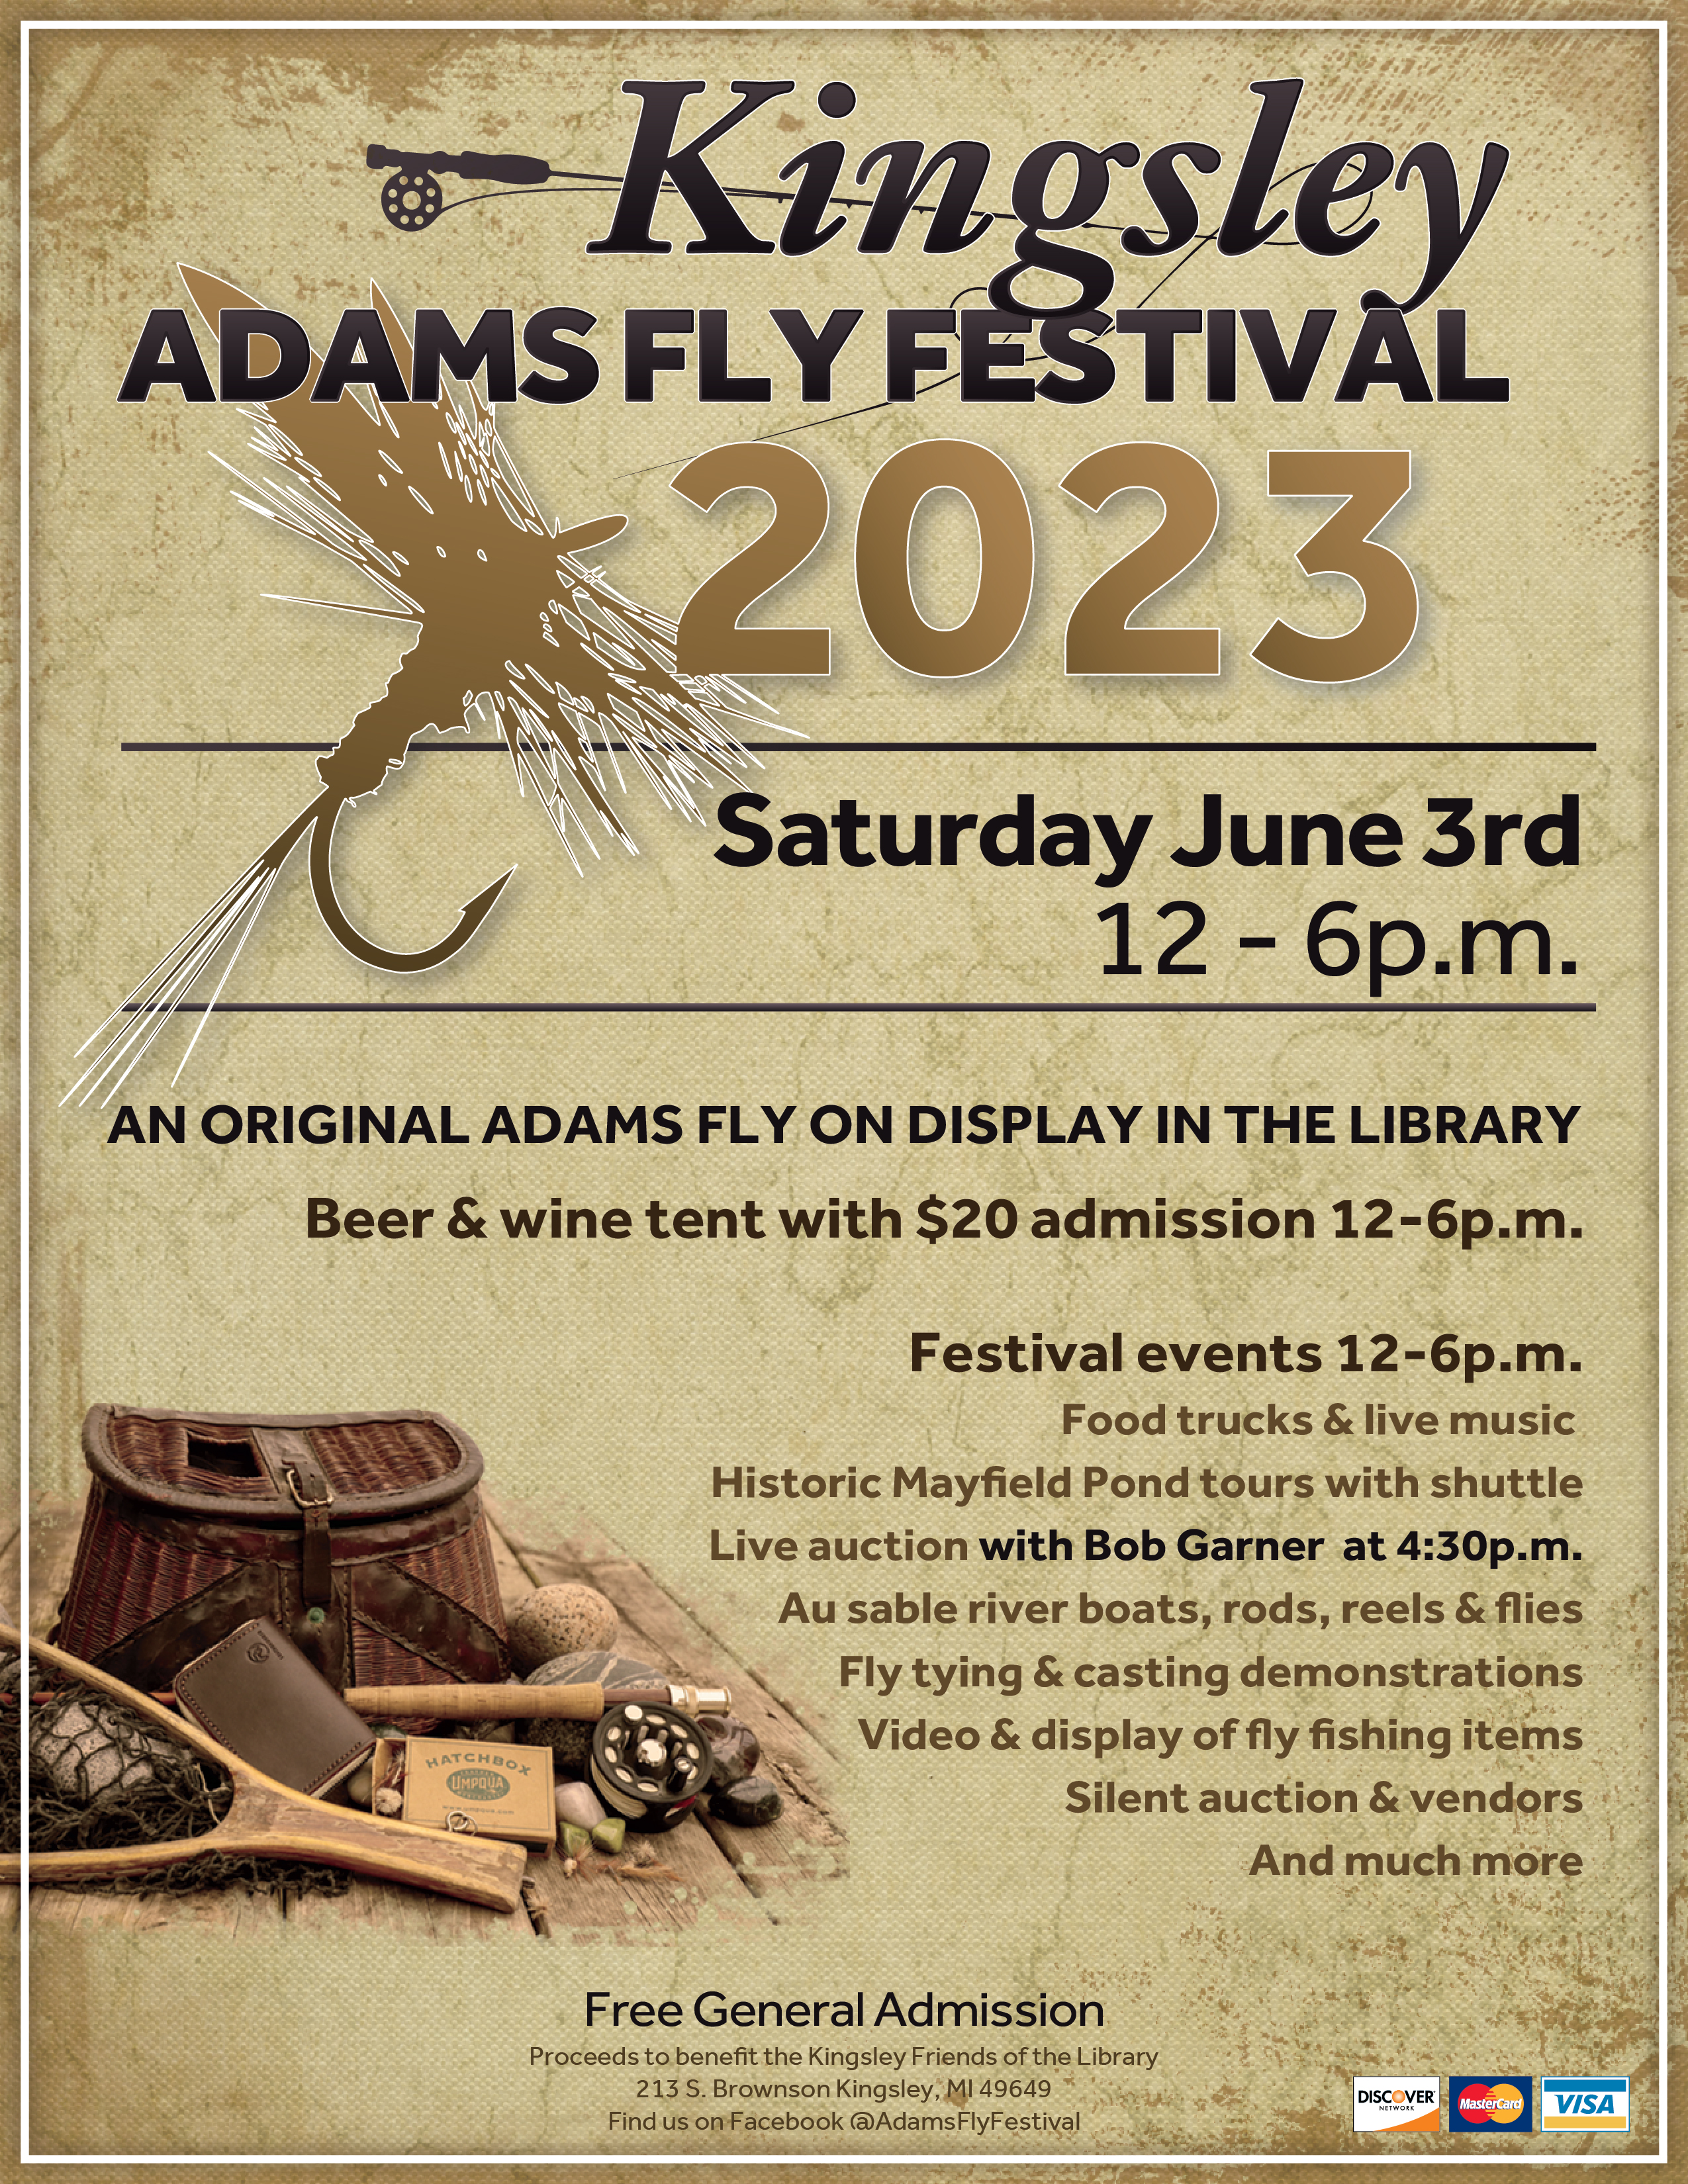 Image of a fly fishing dry fly and a fishing catch basket. Text over image reads "Kingsley Adams Fly Festival 2023", on Saturday, June 3rd, noon to 6 pm.